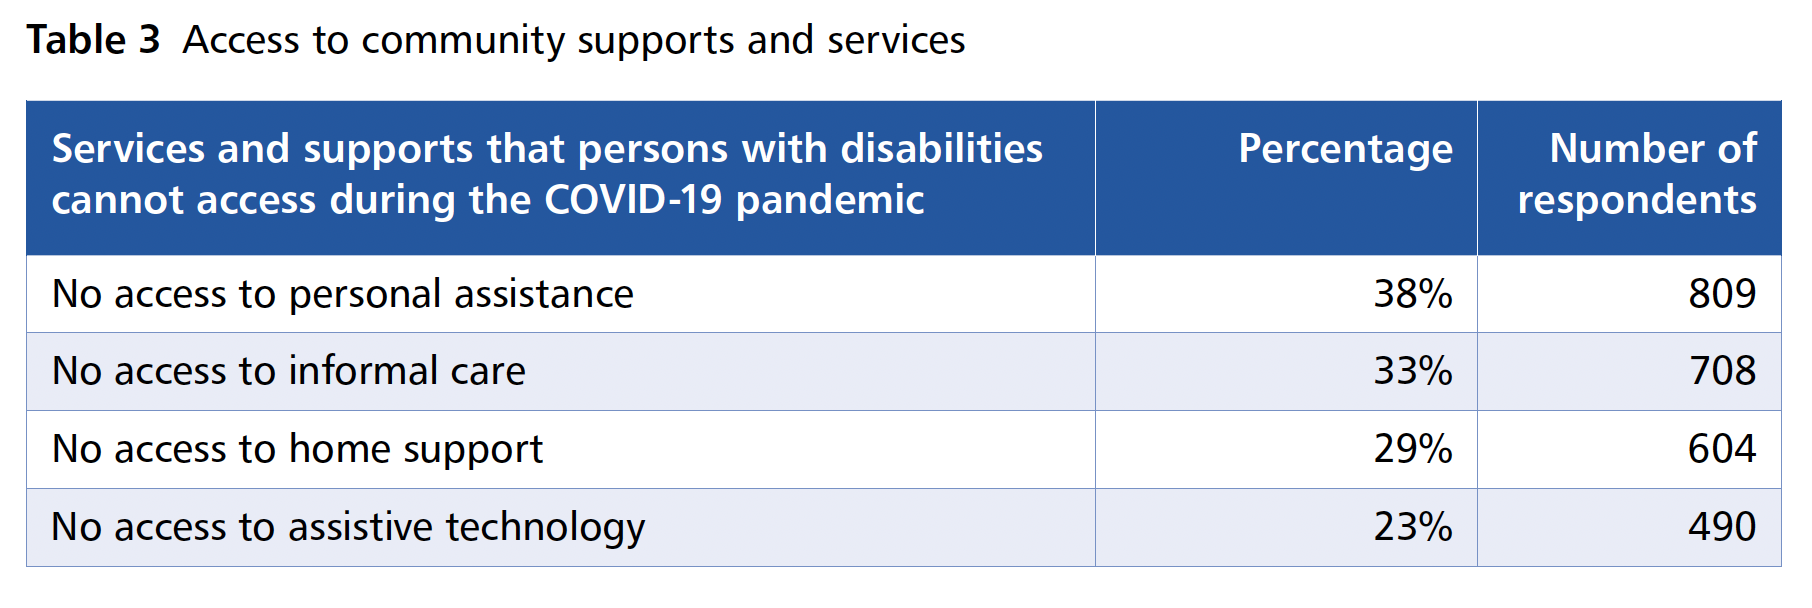 Table 3 (Services and supports that persons with disabilities cannot access during the COVID-19 pandemic, Percentage, Number of respondents; No access to personal assistance, 38%, 809; No access to informal care, 33%, 708; No access to home support, 29%, 604; No access to assistive technology, 23%, 490)